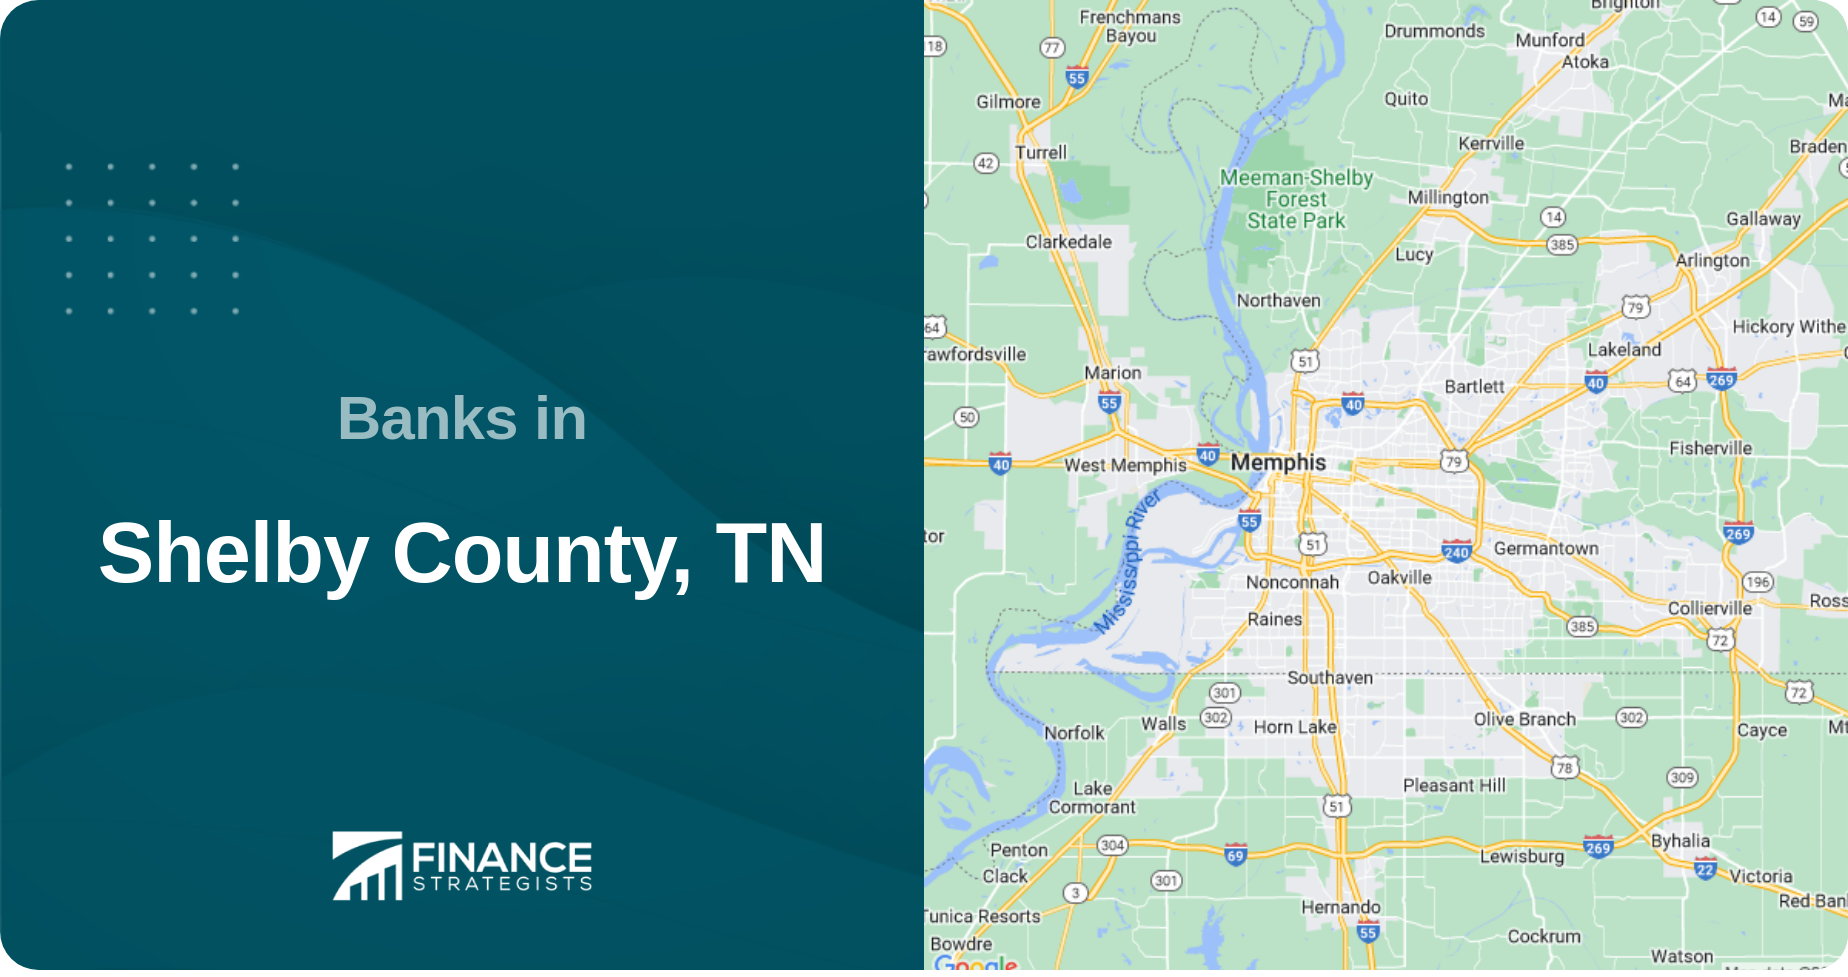 Banks in Shelby County, TN